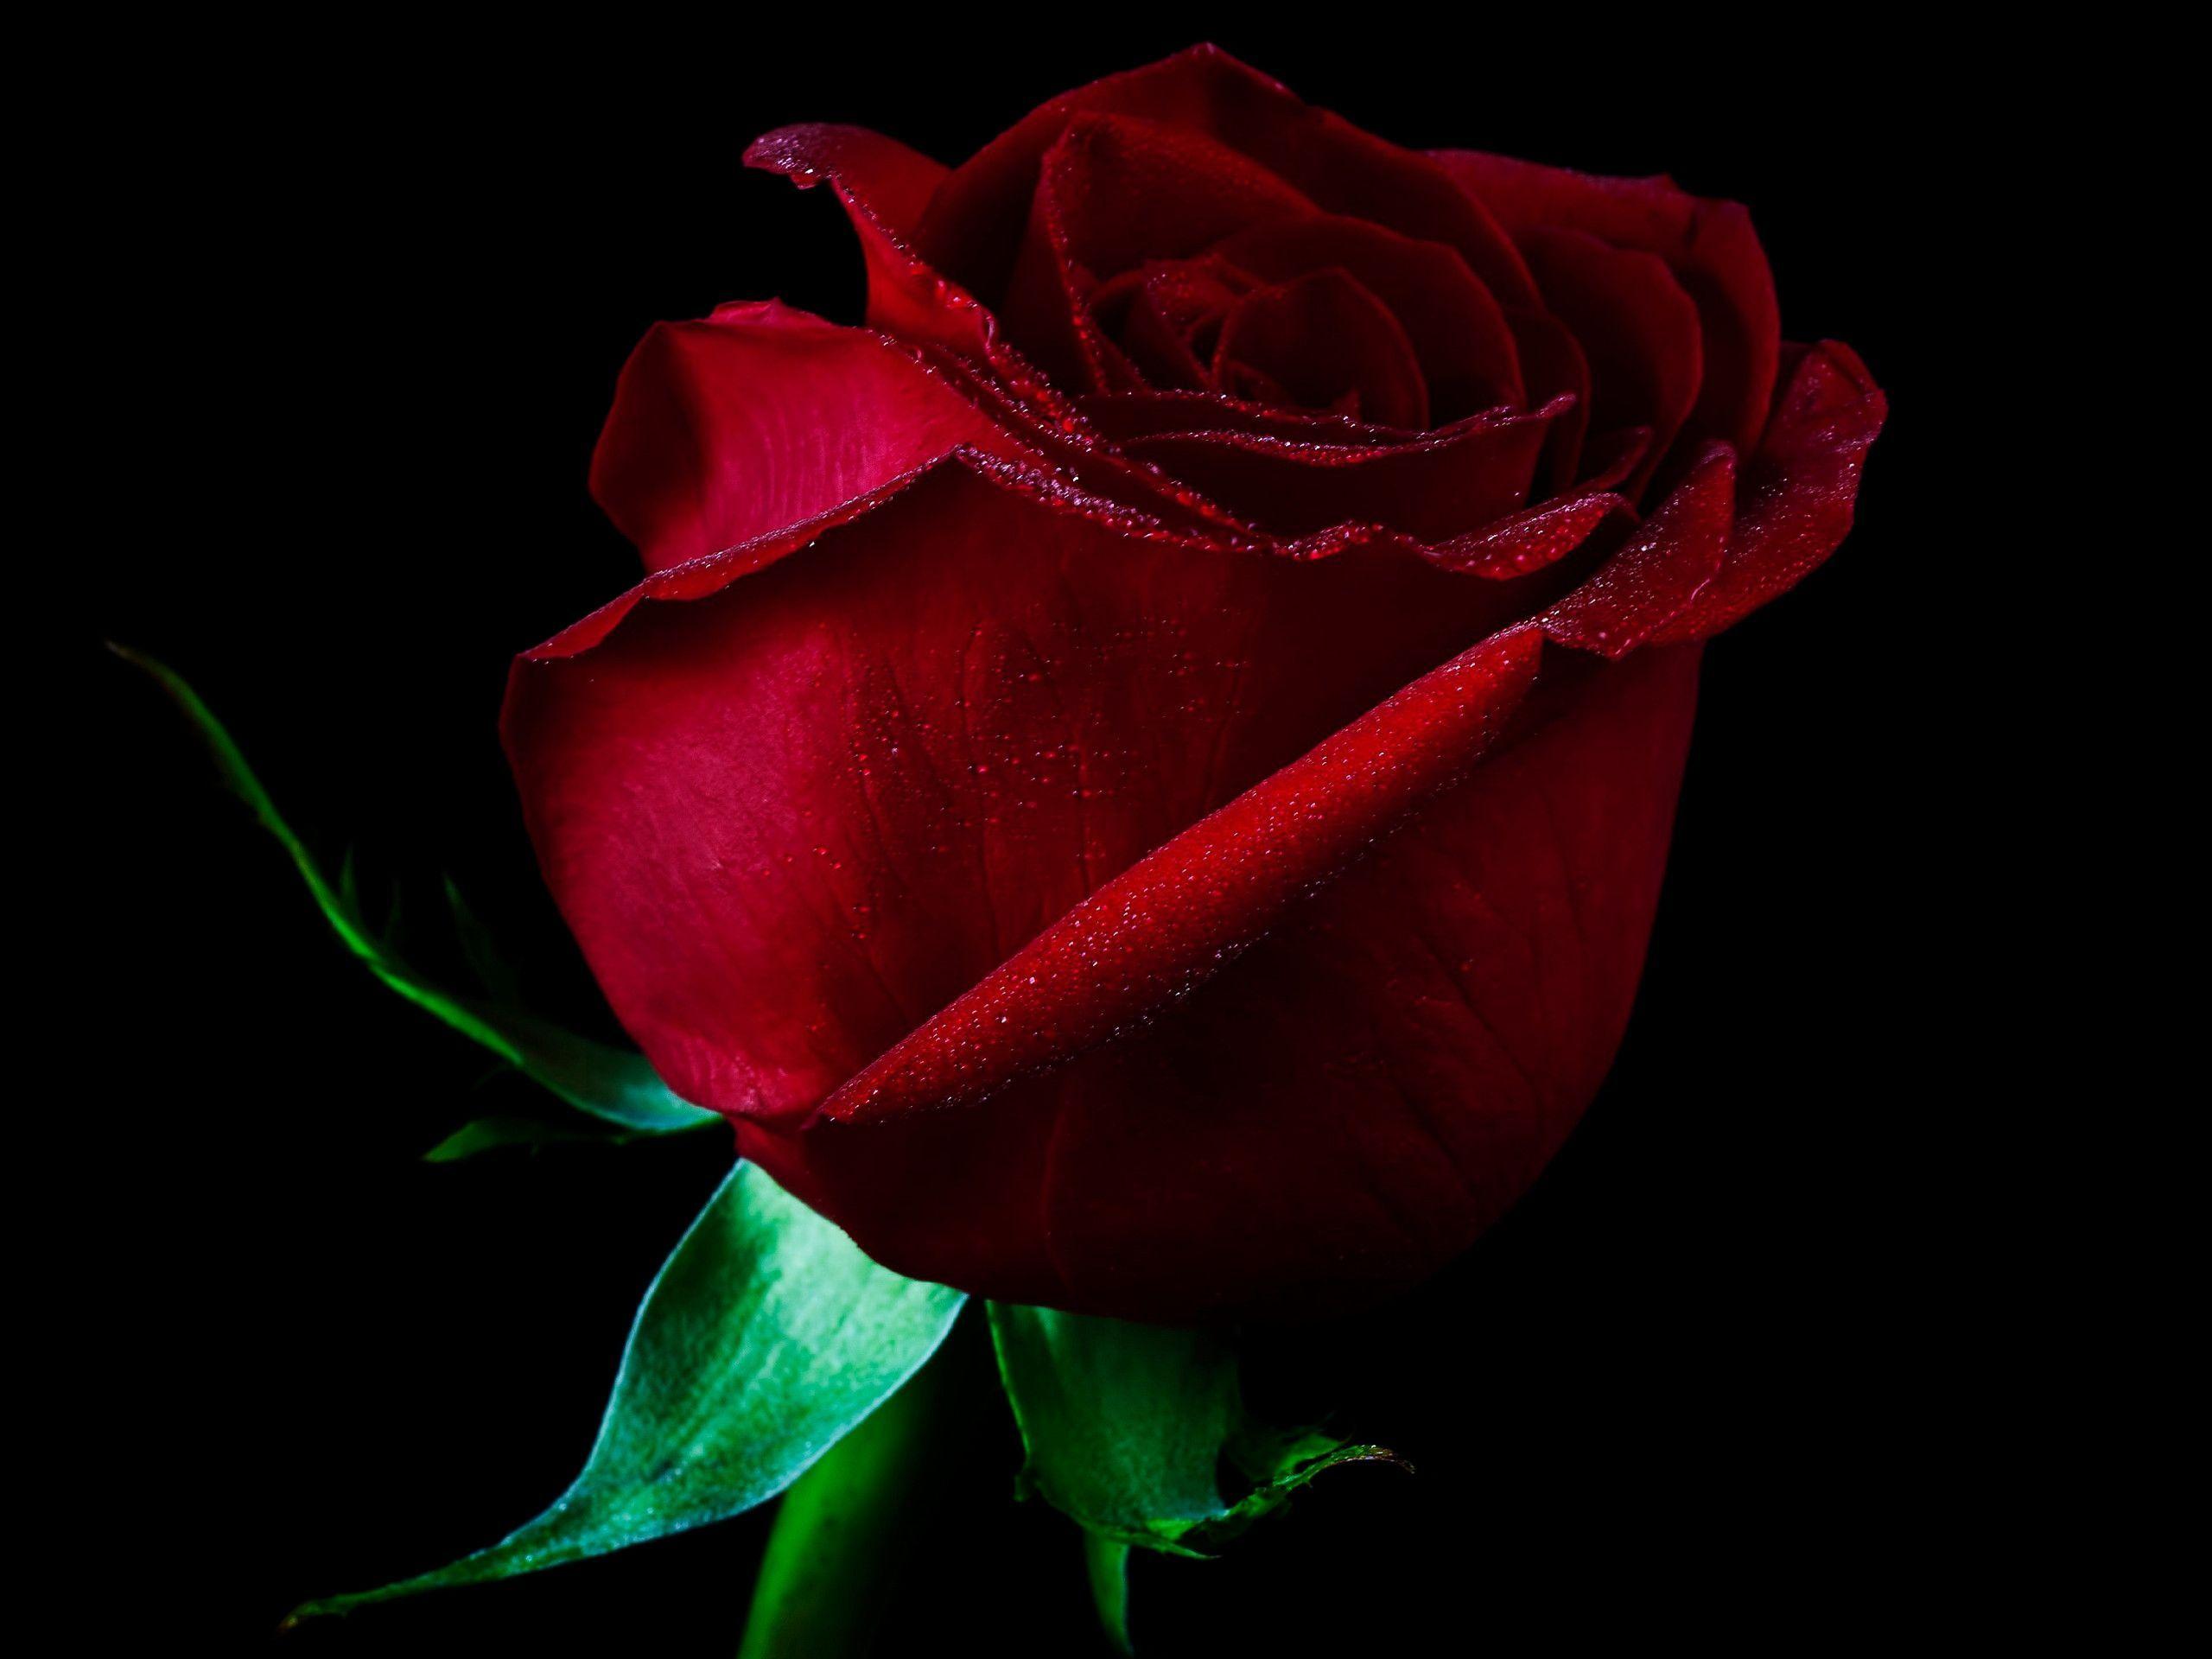 Red Rose HD Wallpaper And Picture. TanukinoSippo